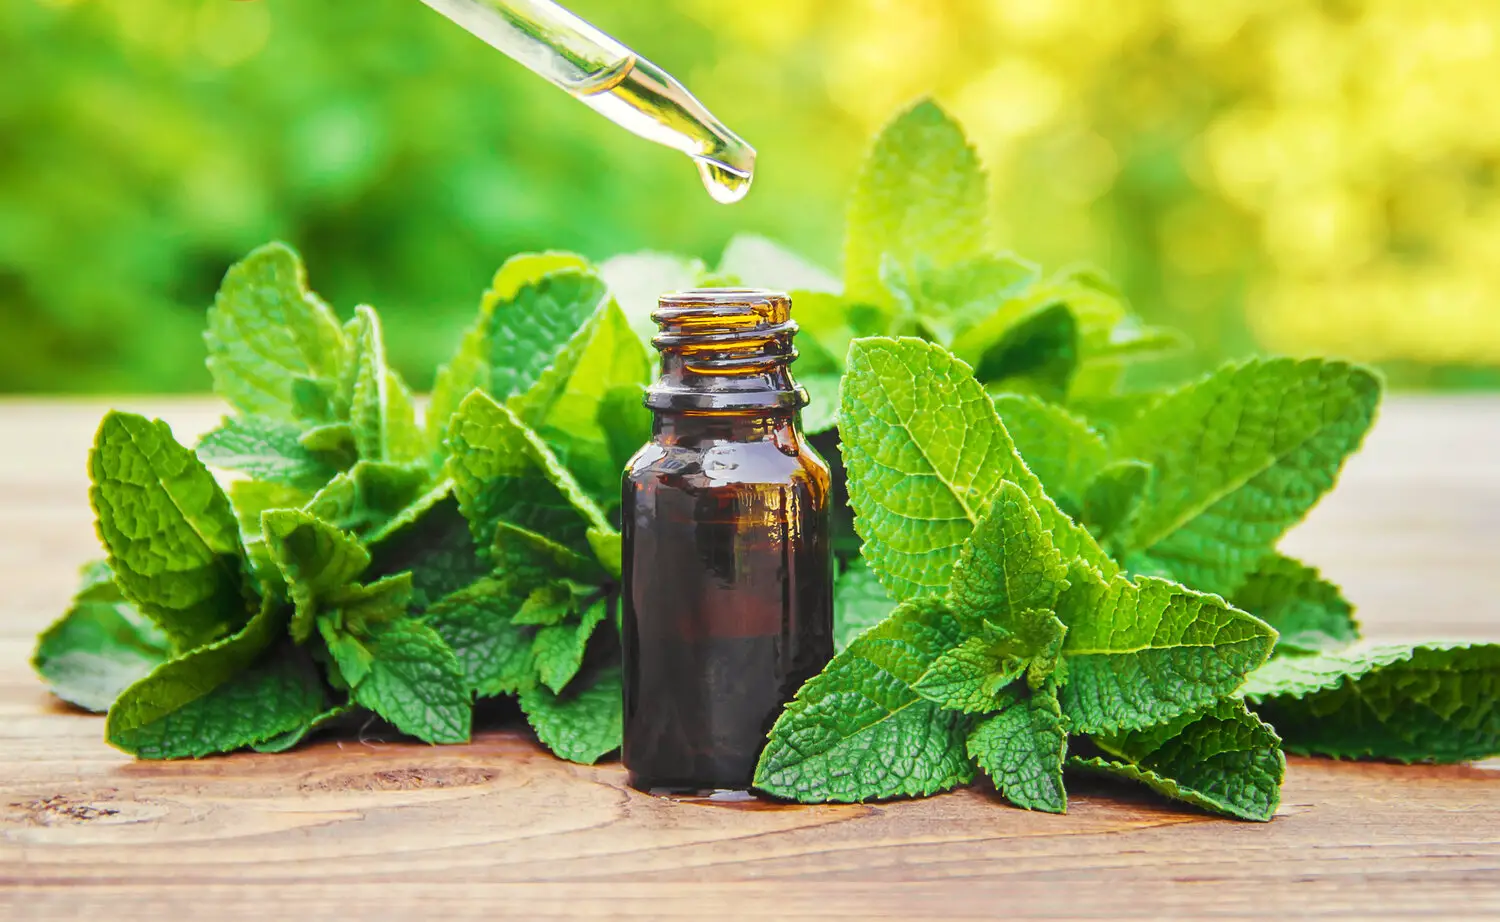 Peppermint essential oil smelling weird. What is the reason?